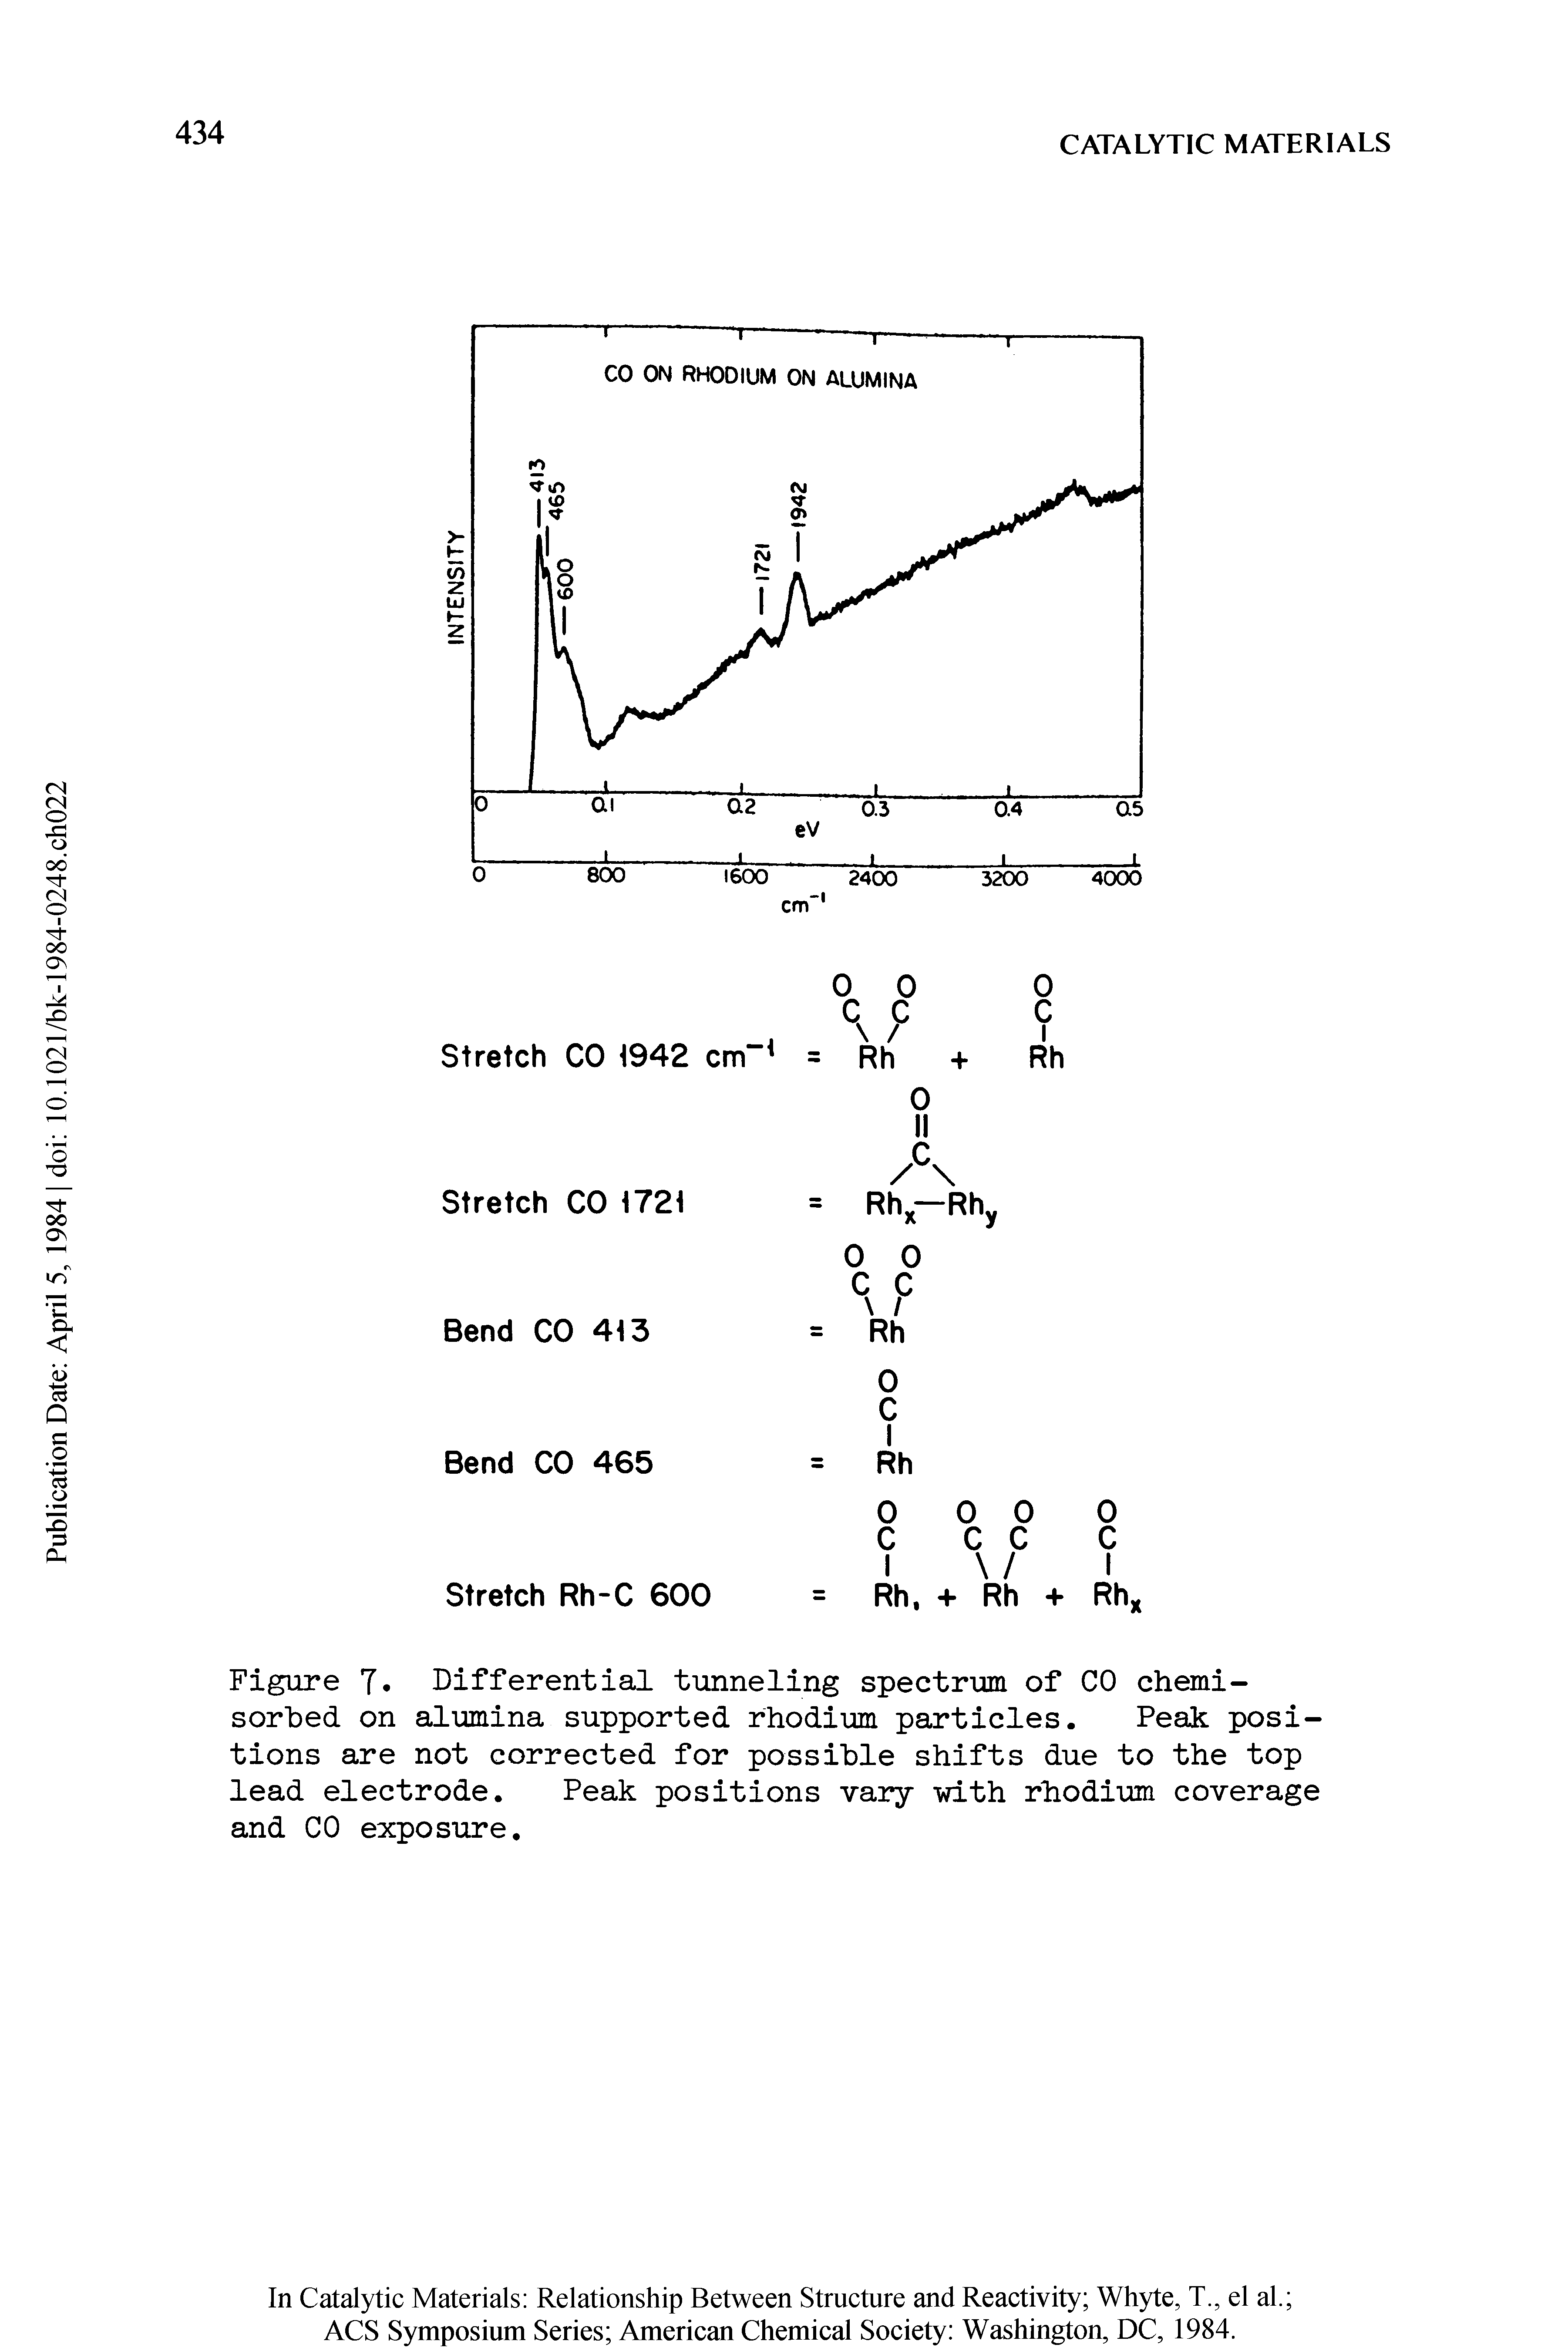 Figure 7 Differential tunneling spectrum of CO chemisorbed on alumina supported rhodium particles. Peak positions are not corrected for possible shifts due to the top lead electrode. Peak positions vary with rhodium coverage and CO exposure.